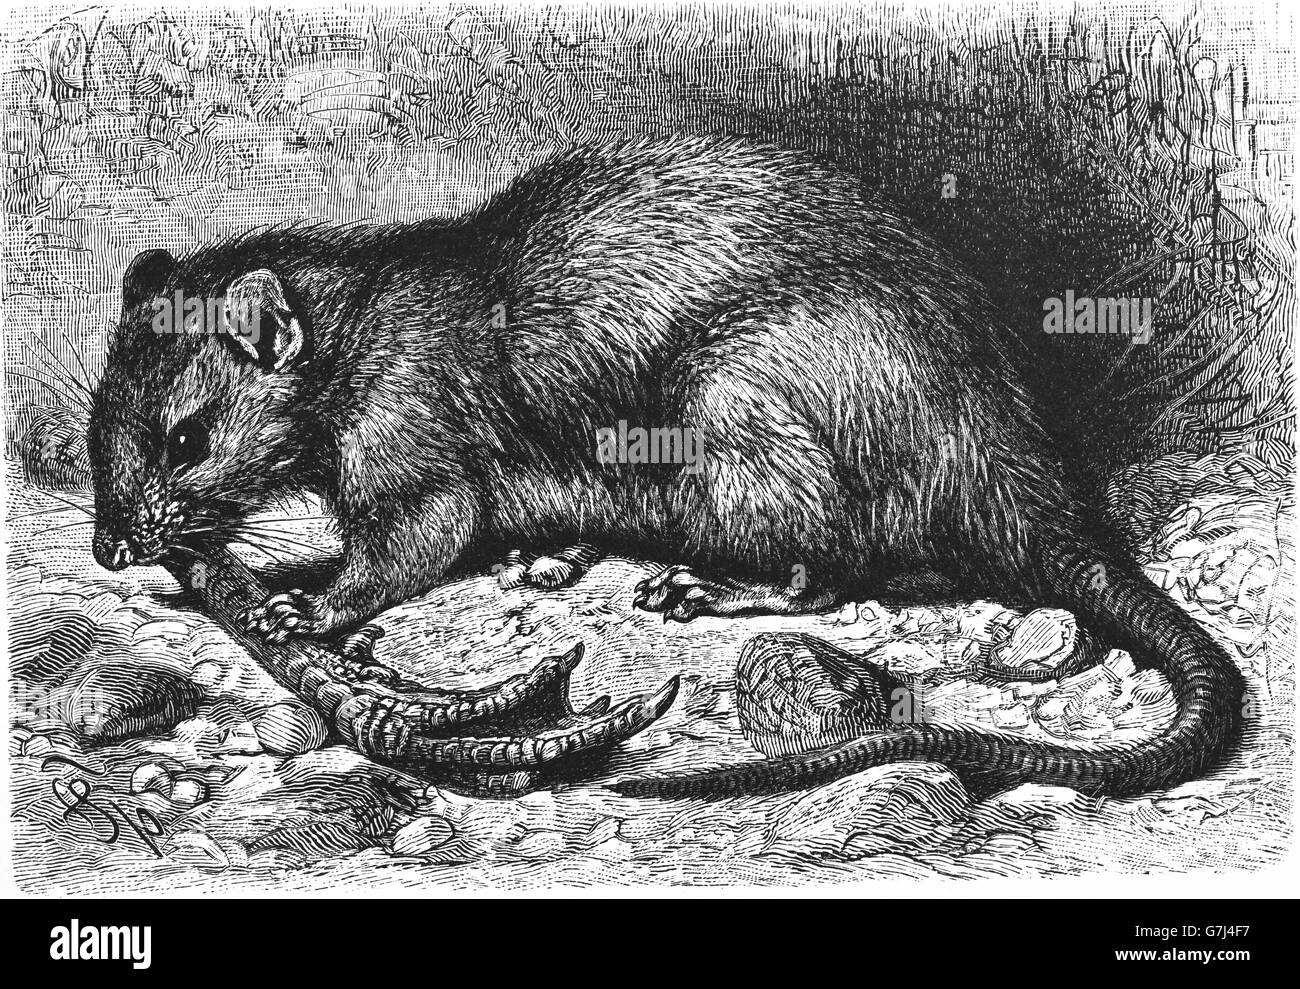 Brown Norway rat, Rattus norvegicus, illustration from book dated 1904 Stock Photo